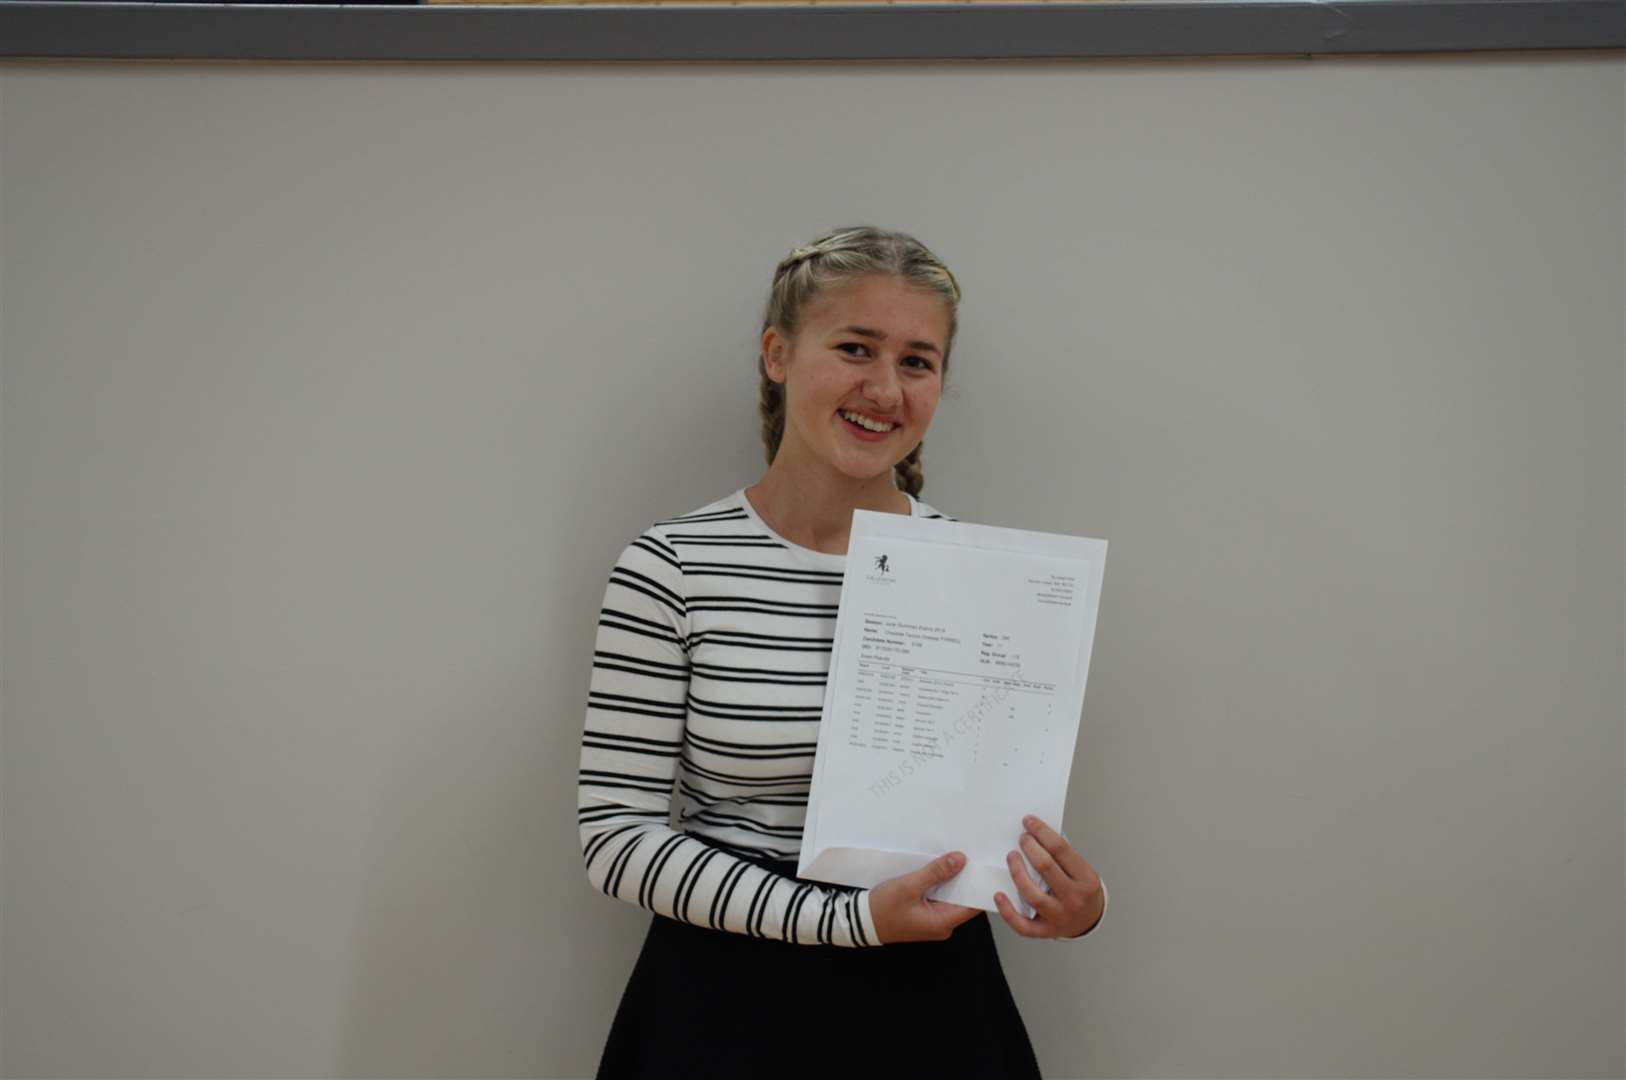 The Lenham School's Charlotte Tyrrell who achieved: Business Studies Distinction *, Design & Technology 7, Double Science 8-8, English Lang. 7, English Lit. 9, Geography 8, German 5, Spanish 7, Sports Studies 6 (15612399)